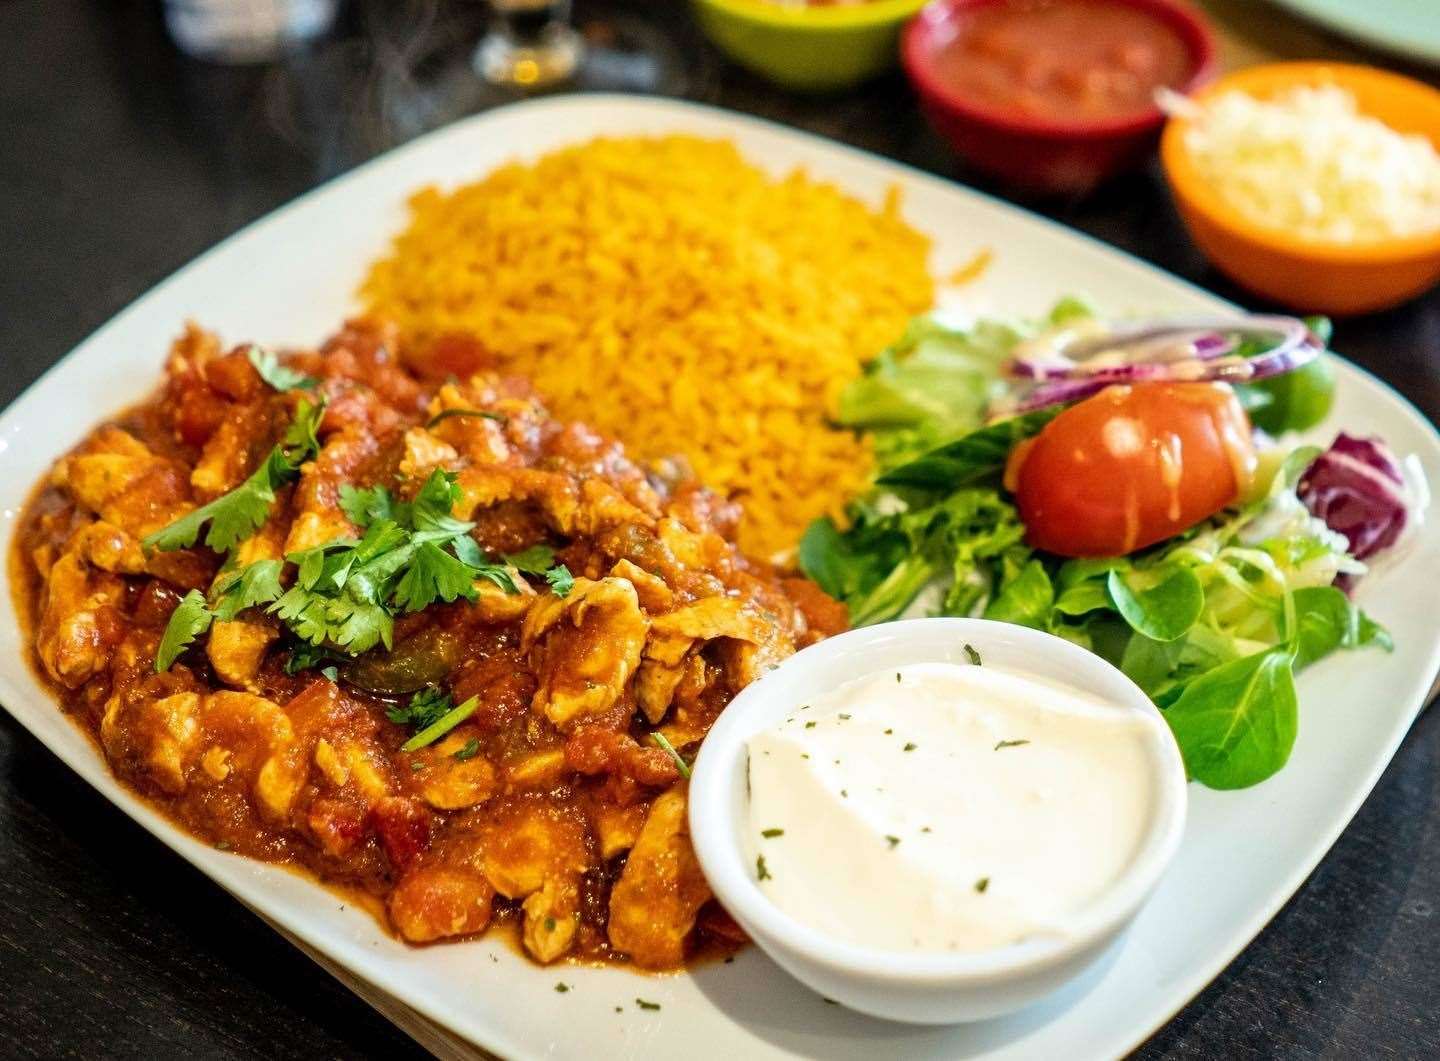 Tuck into a Mexican dish from this Folkestone restaurant. Picture: Facebook / Conchitas